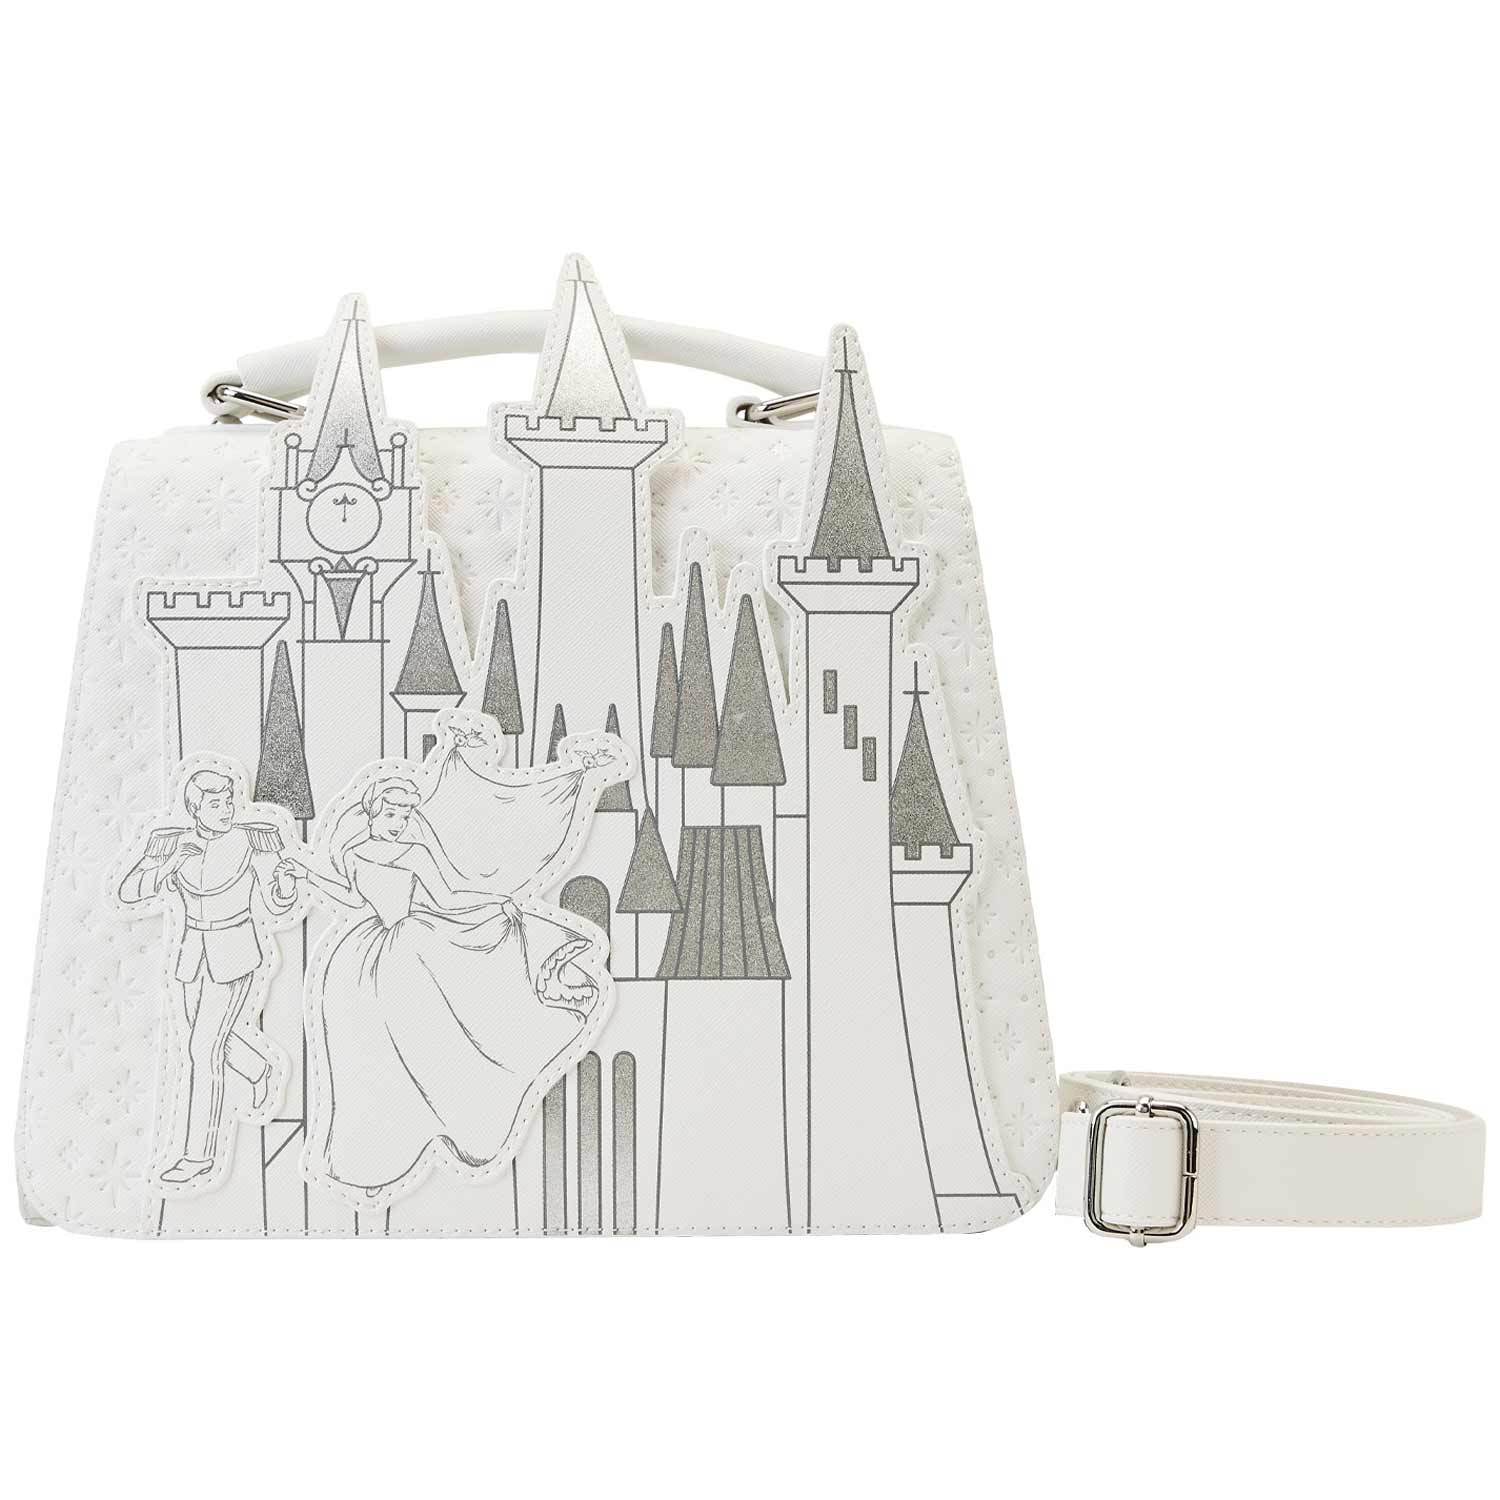 Loungefly x Disney Cinderella Happily Ever After Crossbody Bag